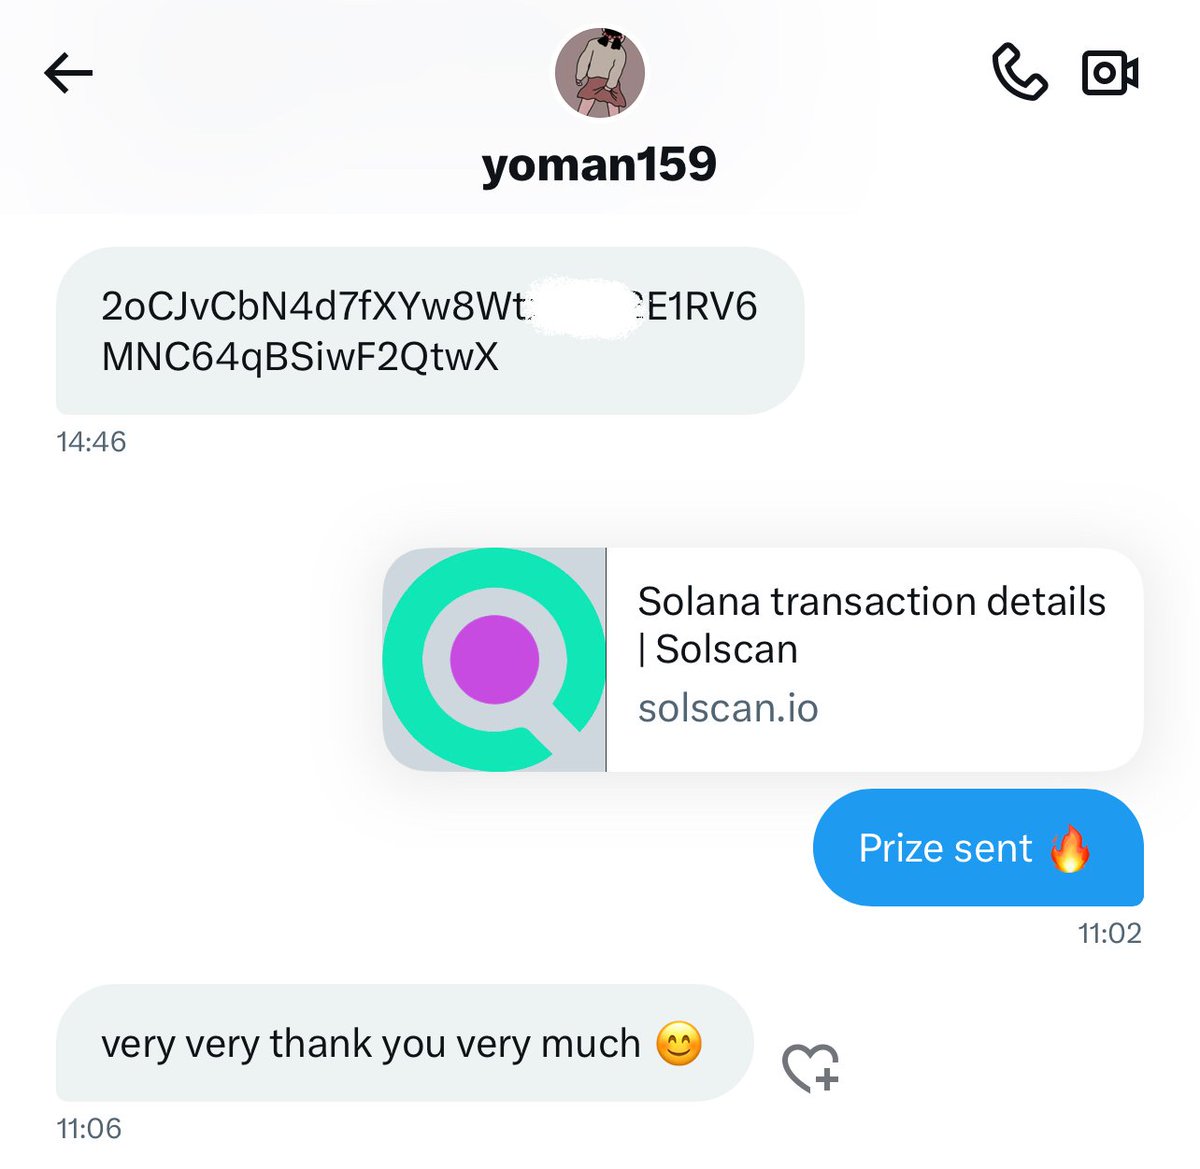 No one deserves an empty wallet. To win next: - RT and Like - Comment SOL wallet 👇